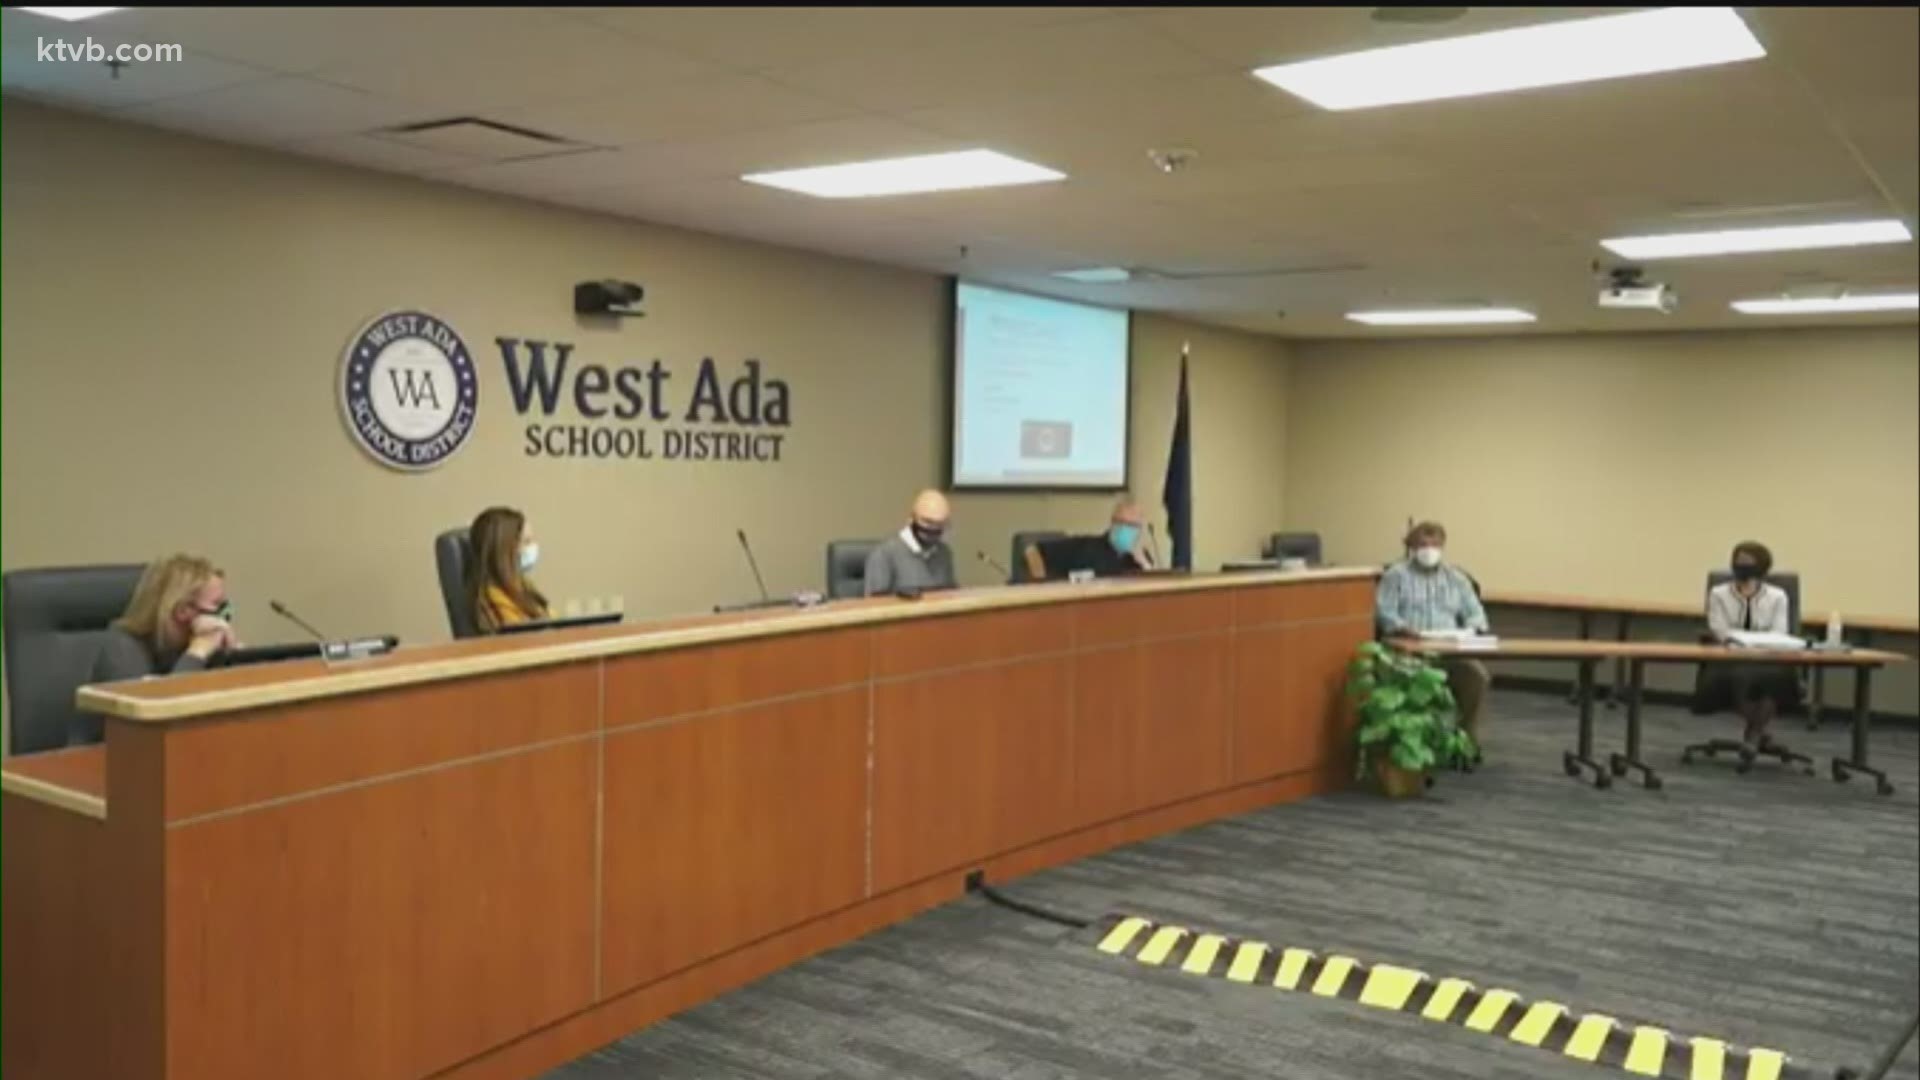 After hours of discussing how to move forward with the fall COVID-19 re-opening plan, West Ada School Board Chairman Ed Klopfenstein announced his resignation.